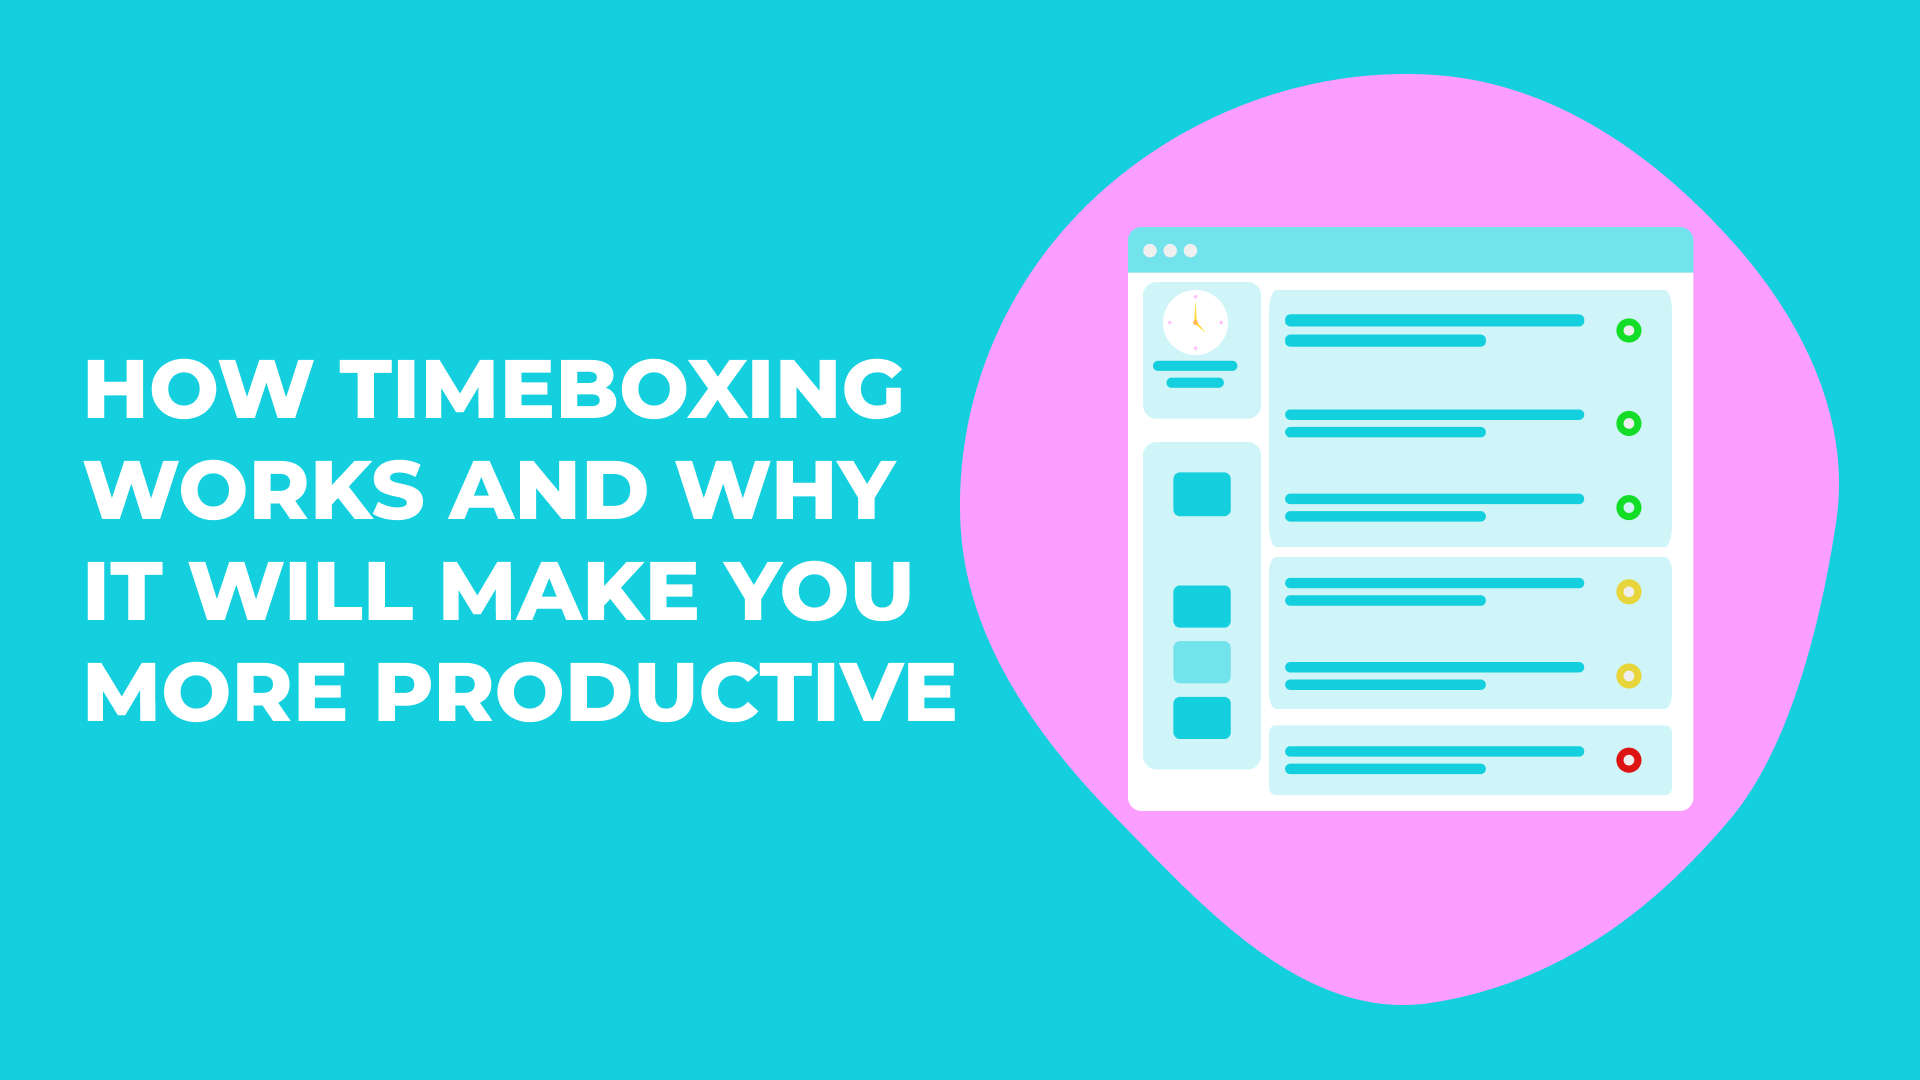 How Timeboxing Works And Why It Will Make You More Productive